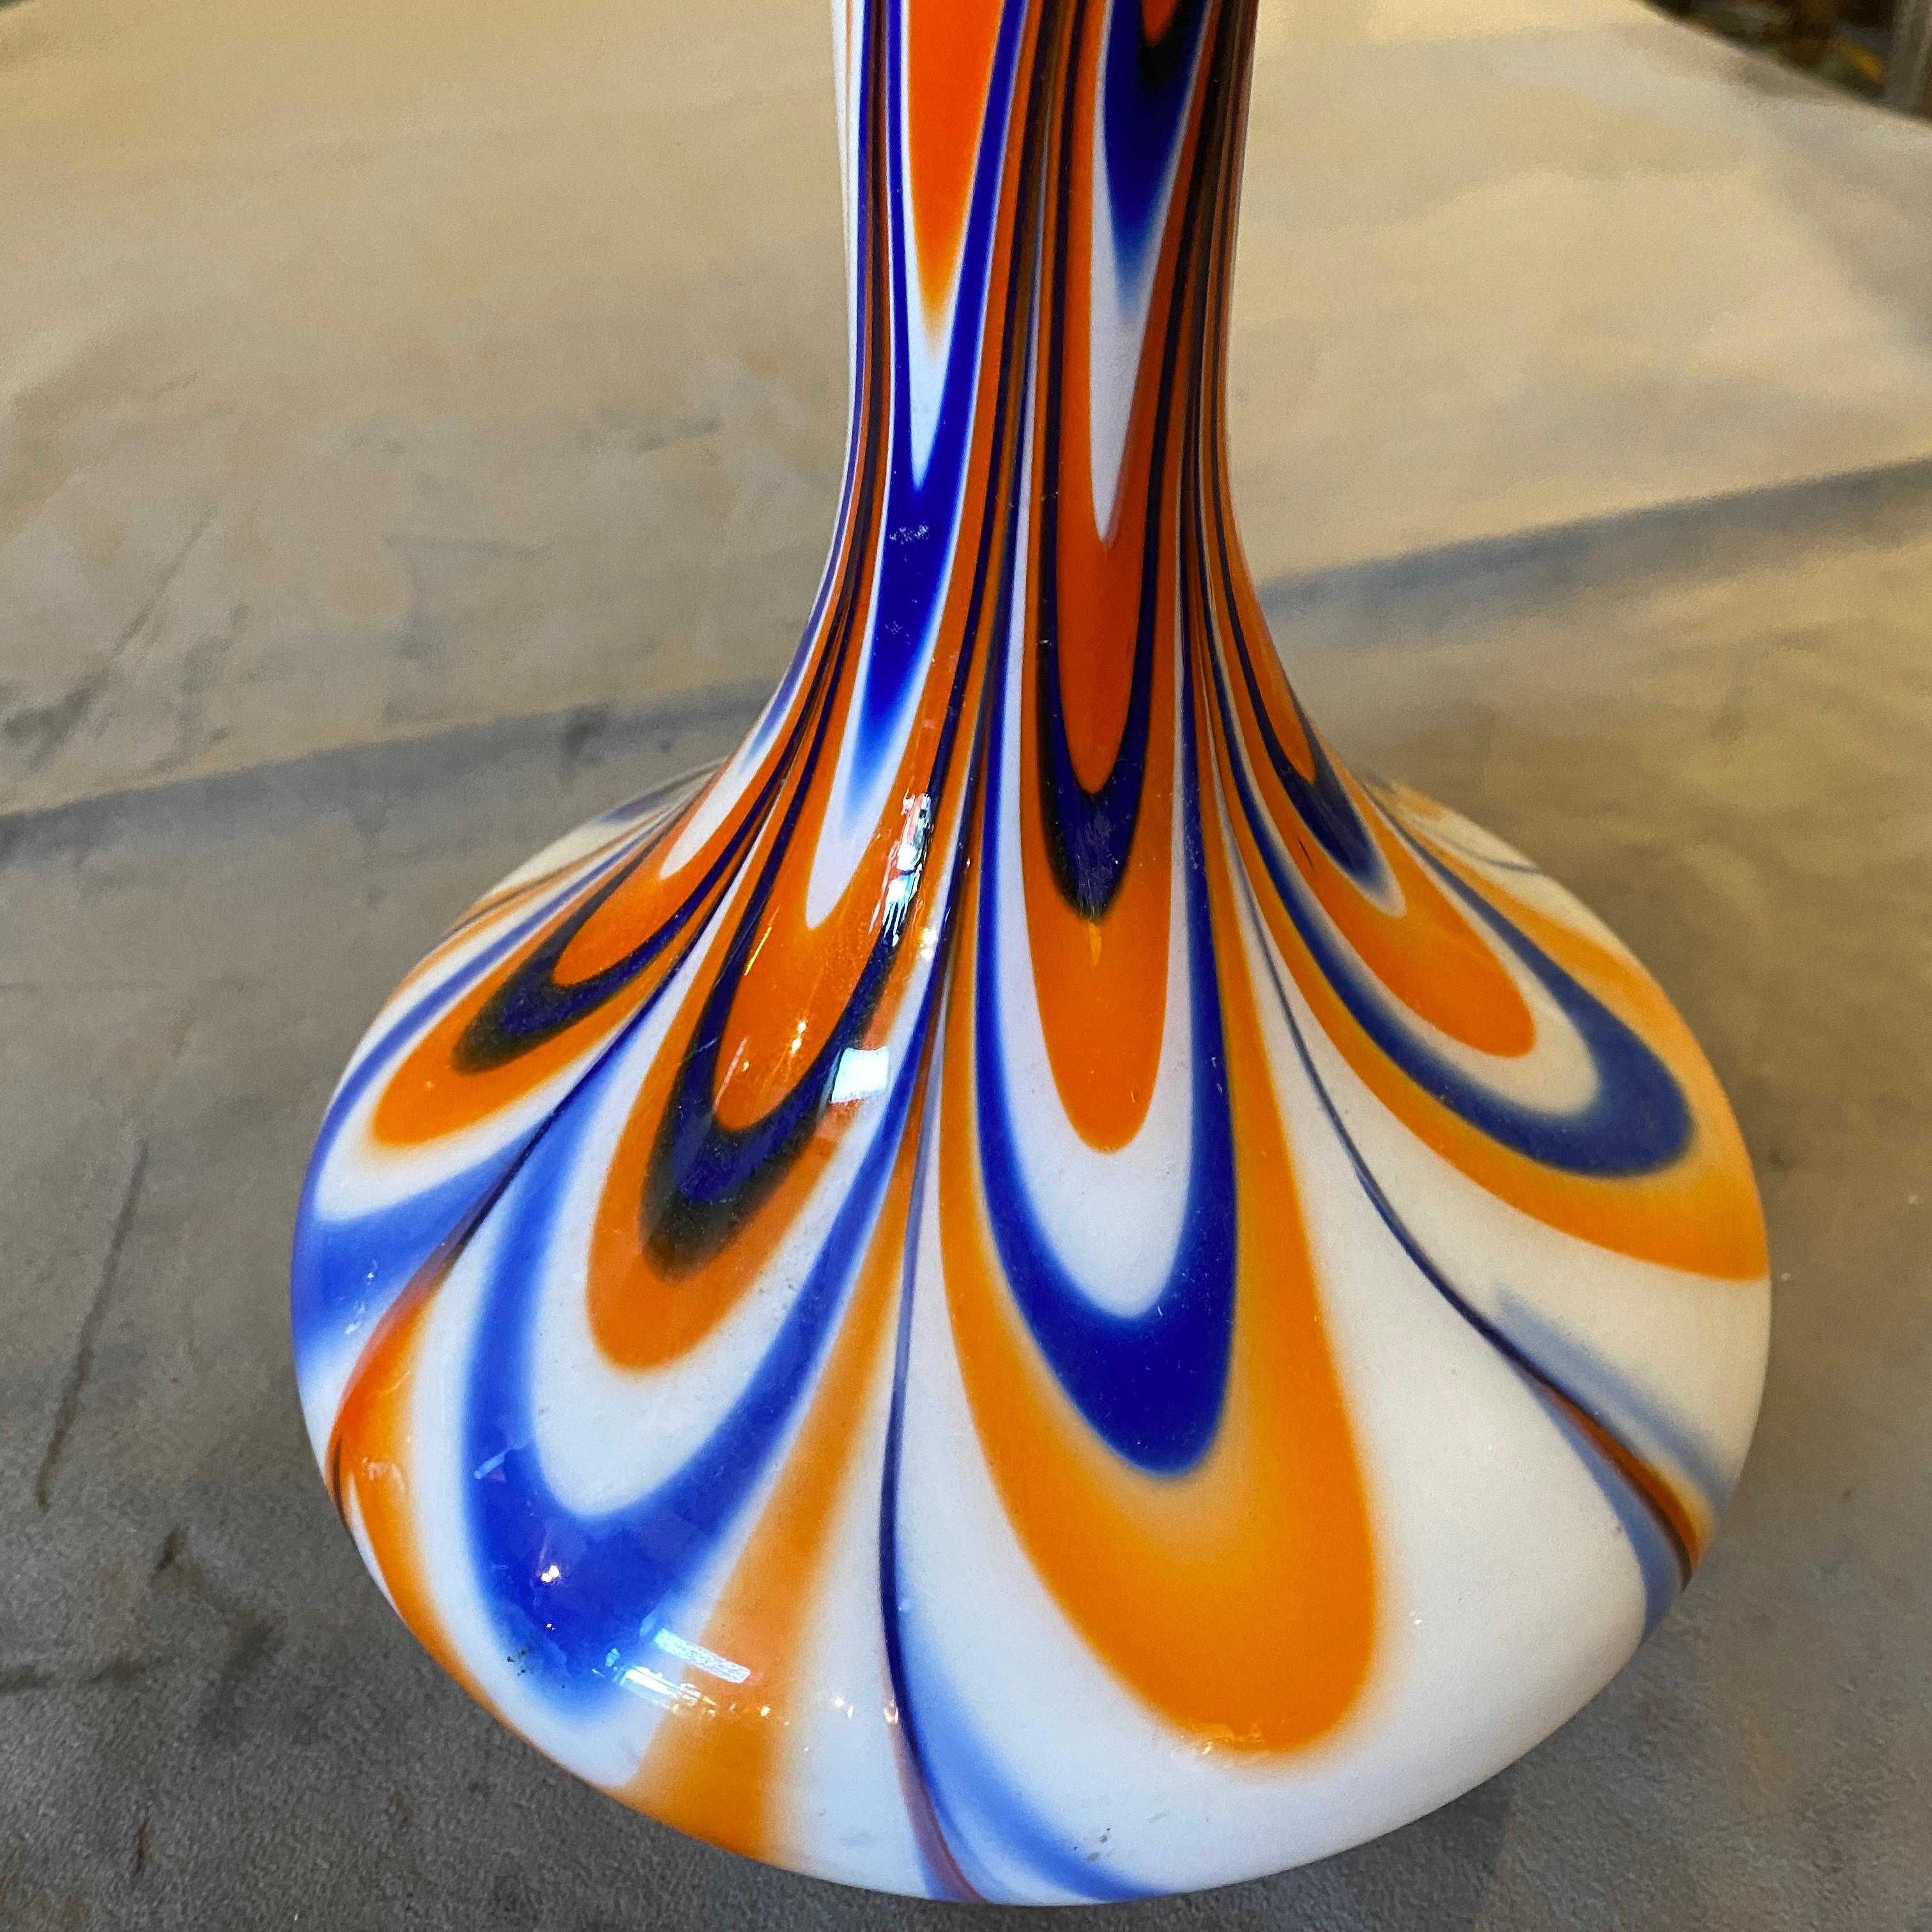 An Italiane vase manufactured by Opaline Florence. Totally hand-crafted, opaline it's in perfect conditions. The orange and blue colors are typical of the period. The Vase is a striking example of Italian glasswork from that era. Designed by Carlo